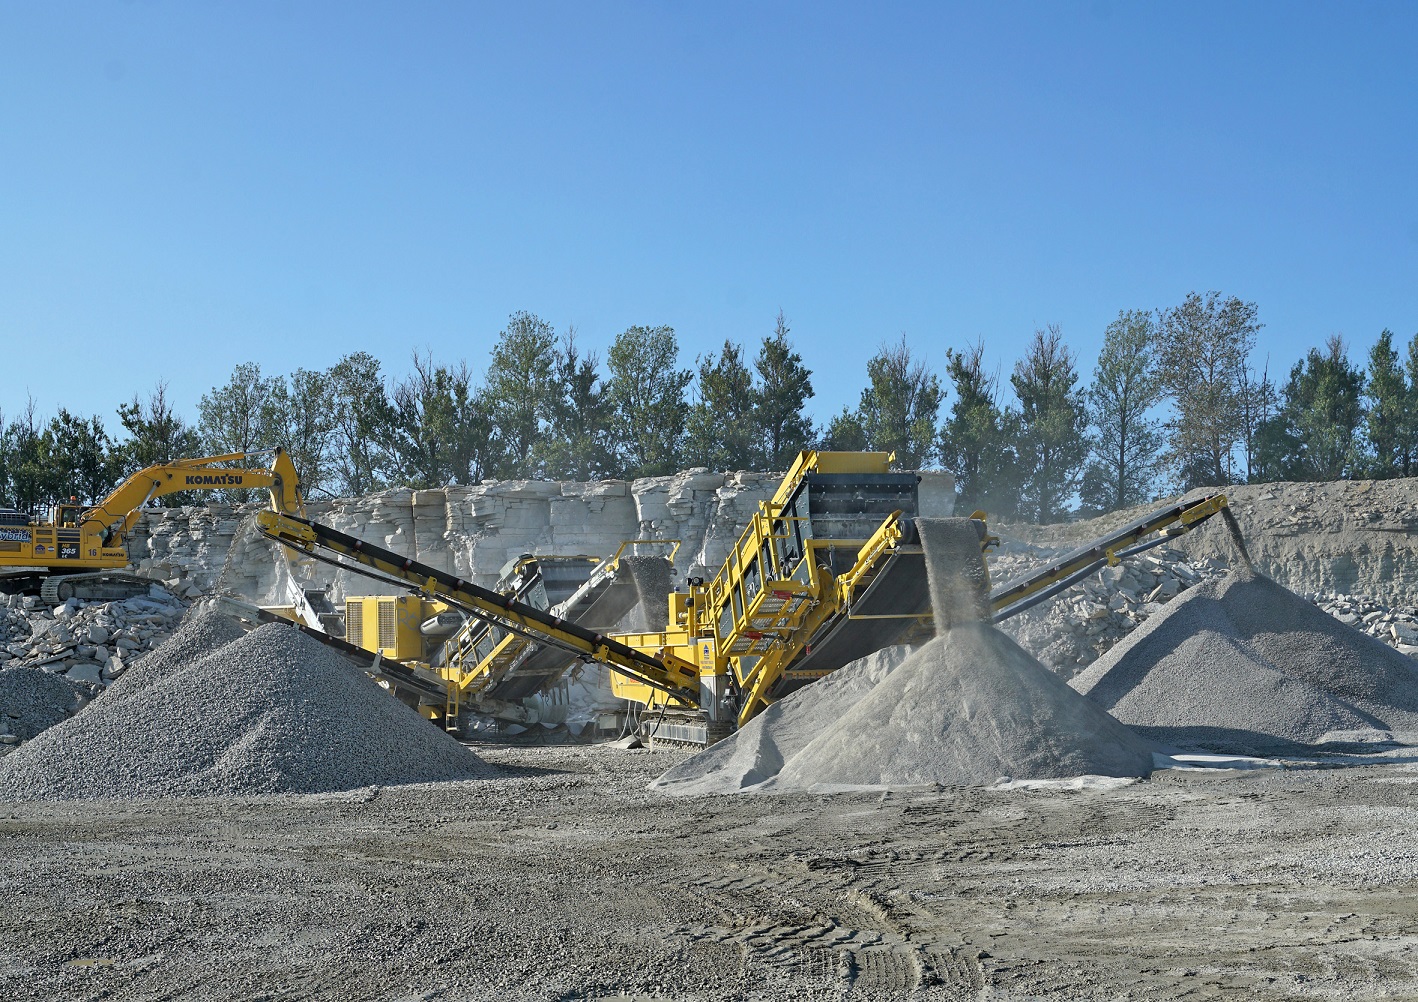 Keestrack has been present in the Indian market manufacturing tracked crushers since 2019